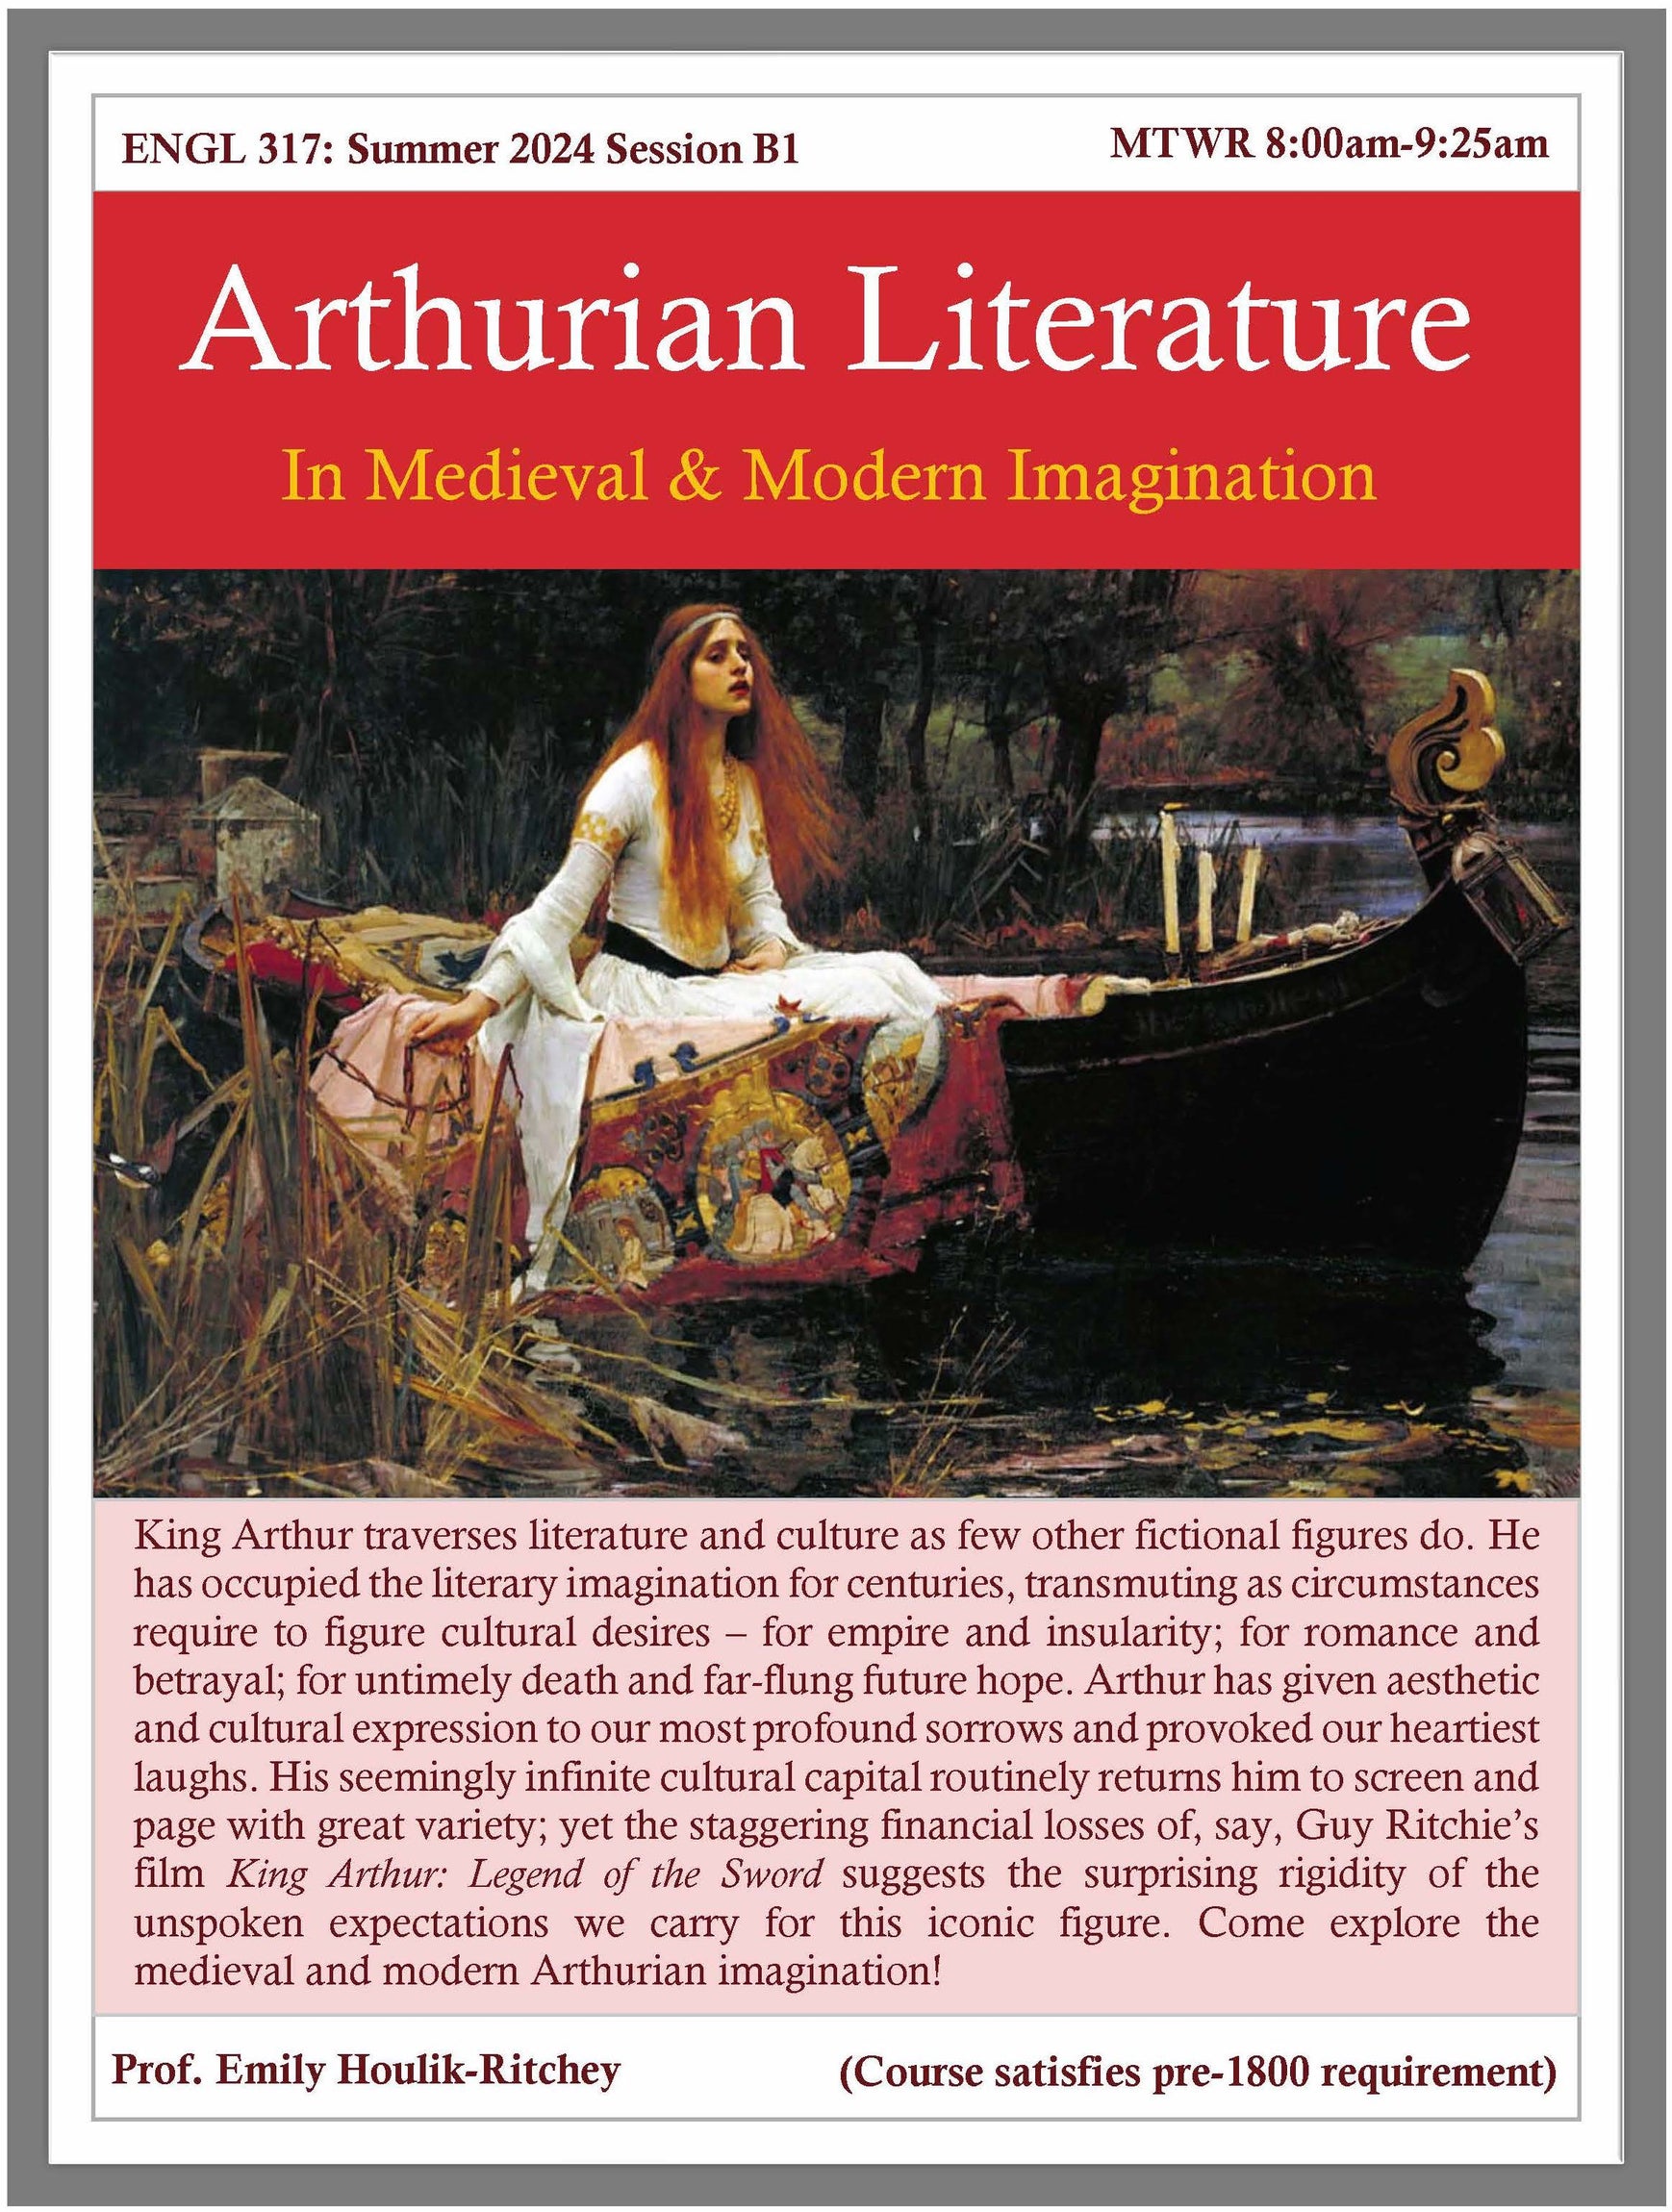 Summer course, English 317, Arthurian Literature, with Professor Houlik-Ritchey